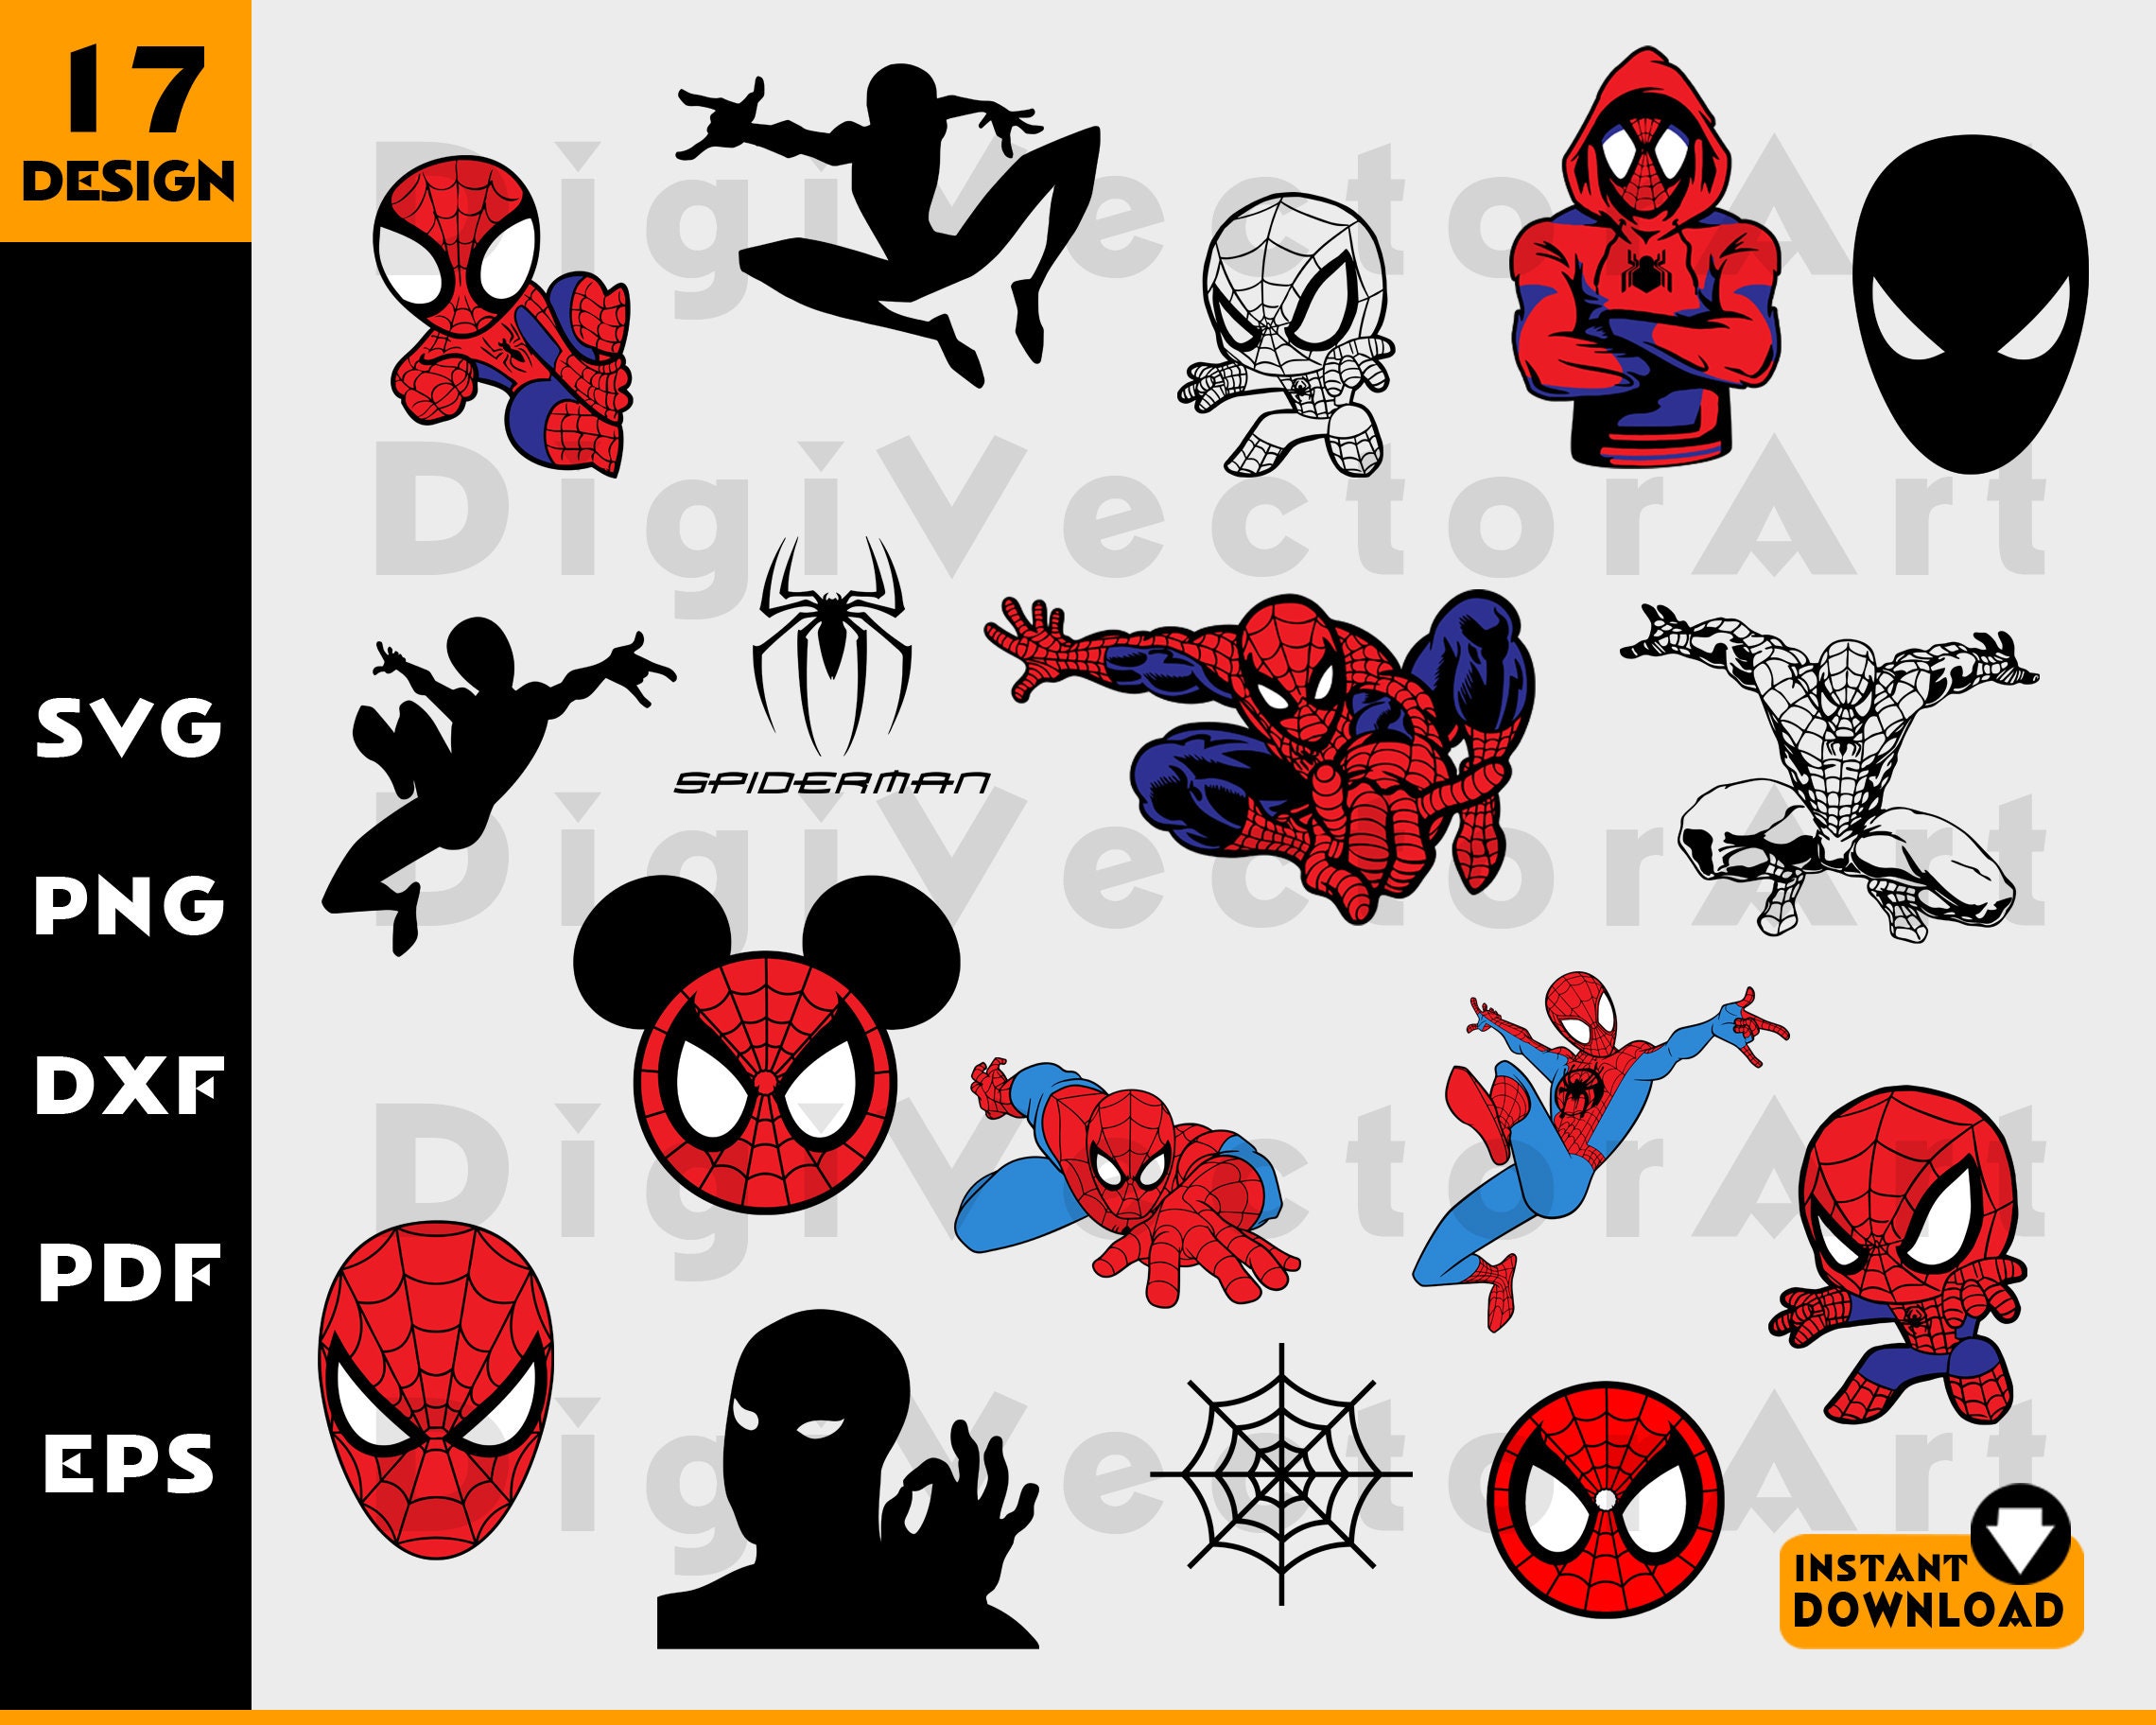 Spider Vector SVG Bundle Clipart Eps Png Dxf Pdf Layered | Etsy Singapore